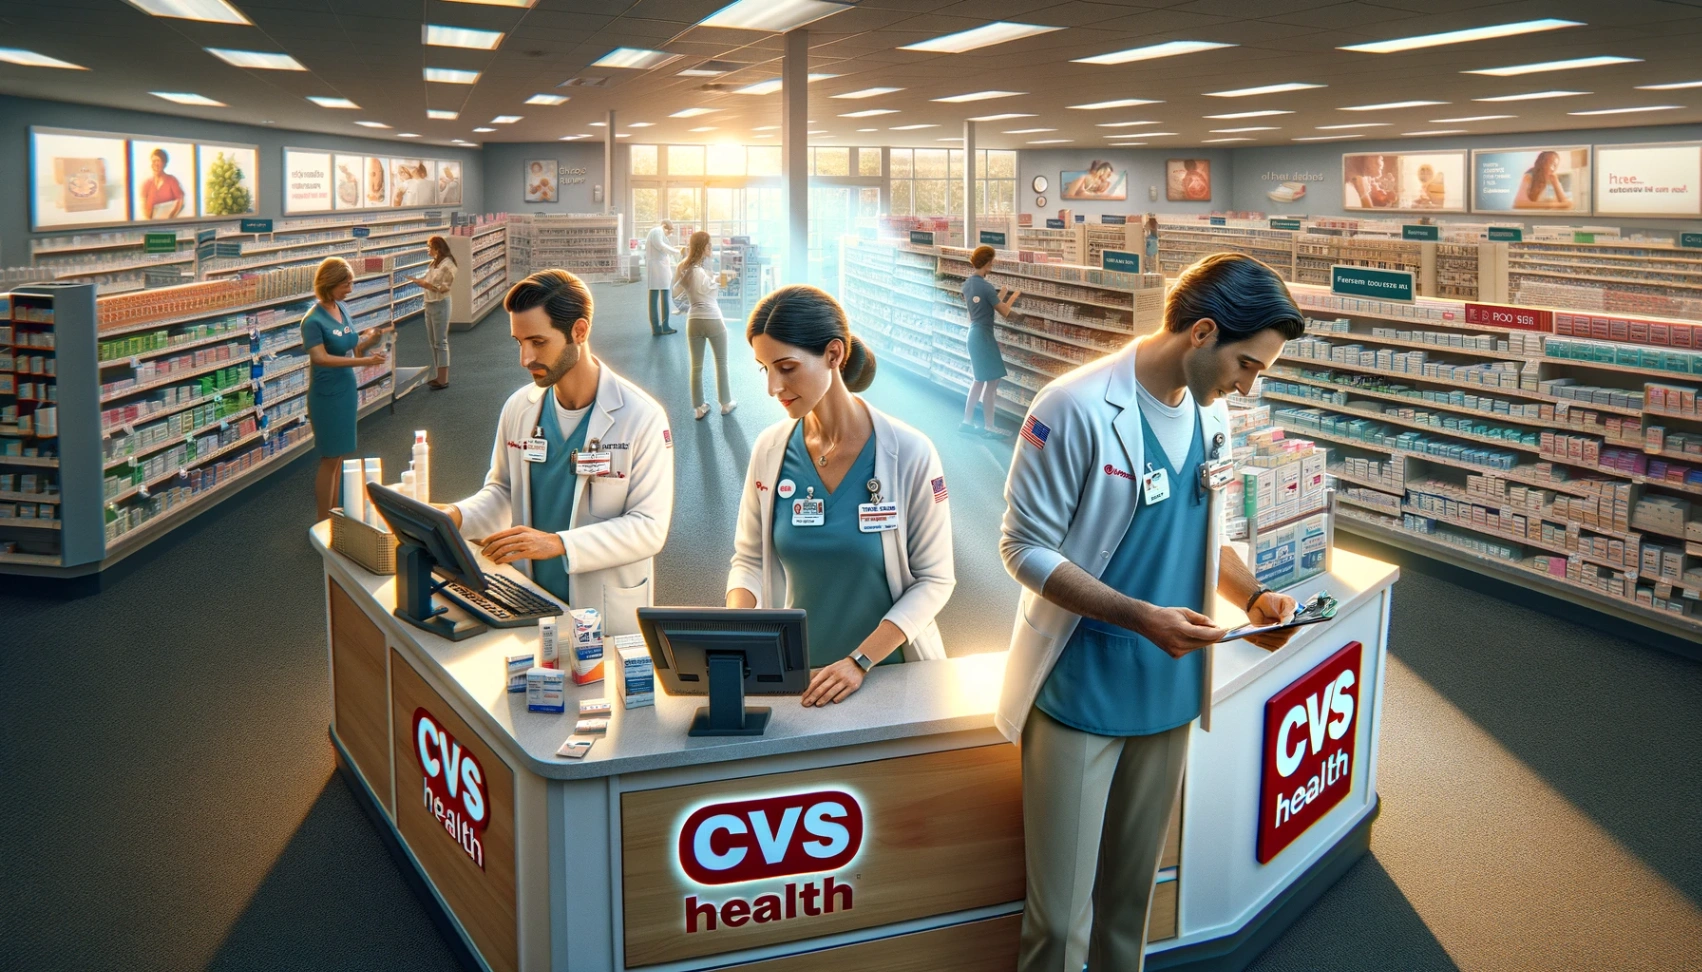 Exploring Career Opportunities at CVS Health: How to Apply Online